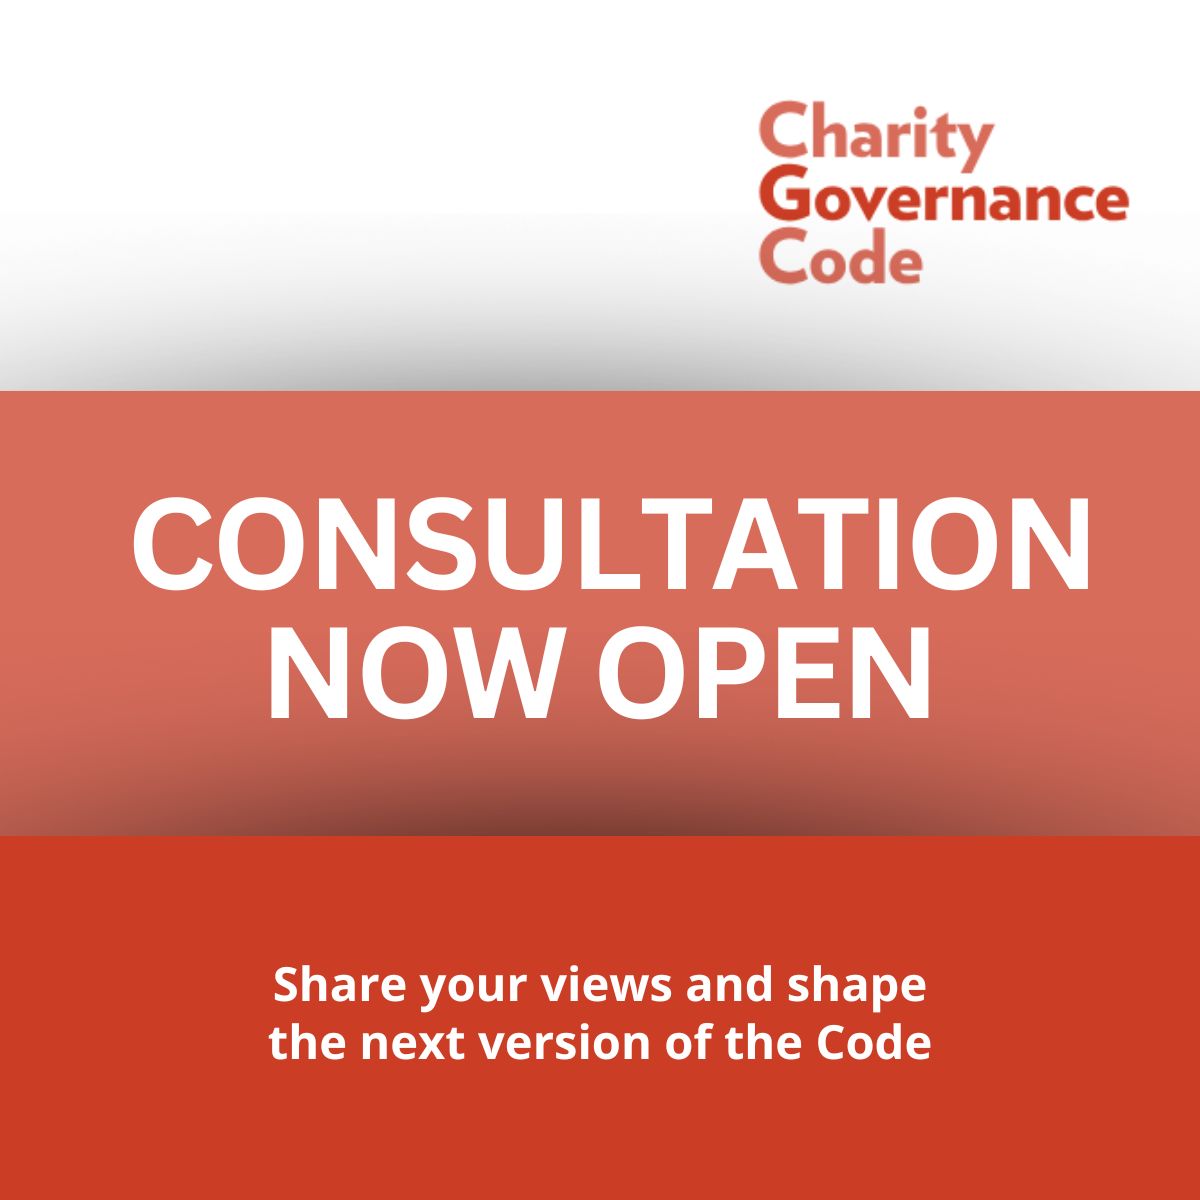 The Charity Governance Code is undergoing an update and they want to hear from you! Respond to the consultation here: eu.surveymonkey.com/r/KXXYKVK In doing so, you'll help make the Code as practical and accessible as possible and support good #Governance across the #CharitySector.